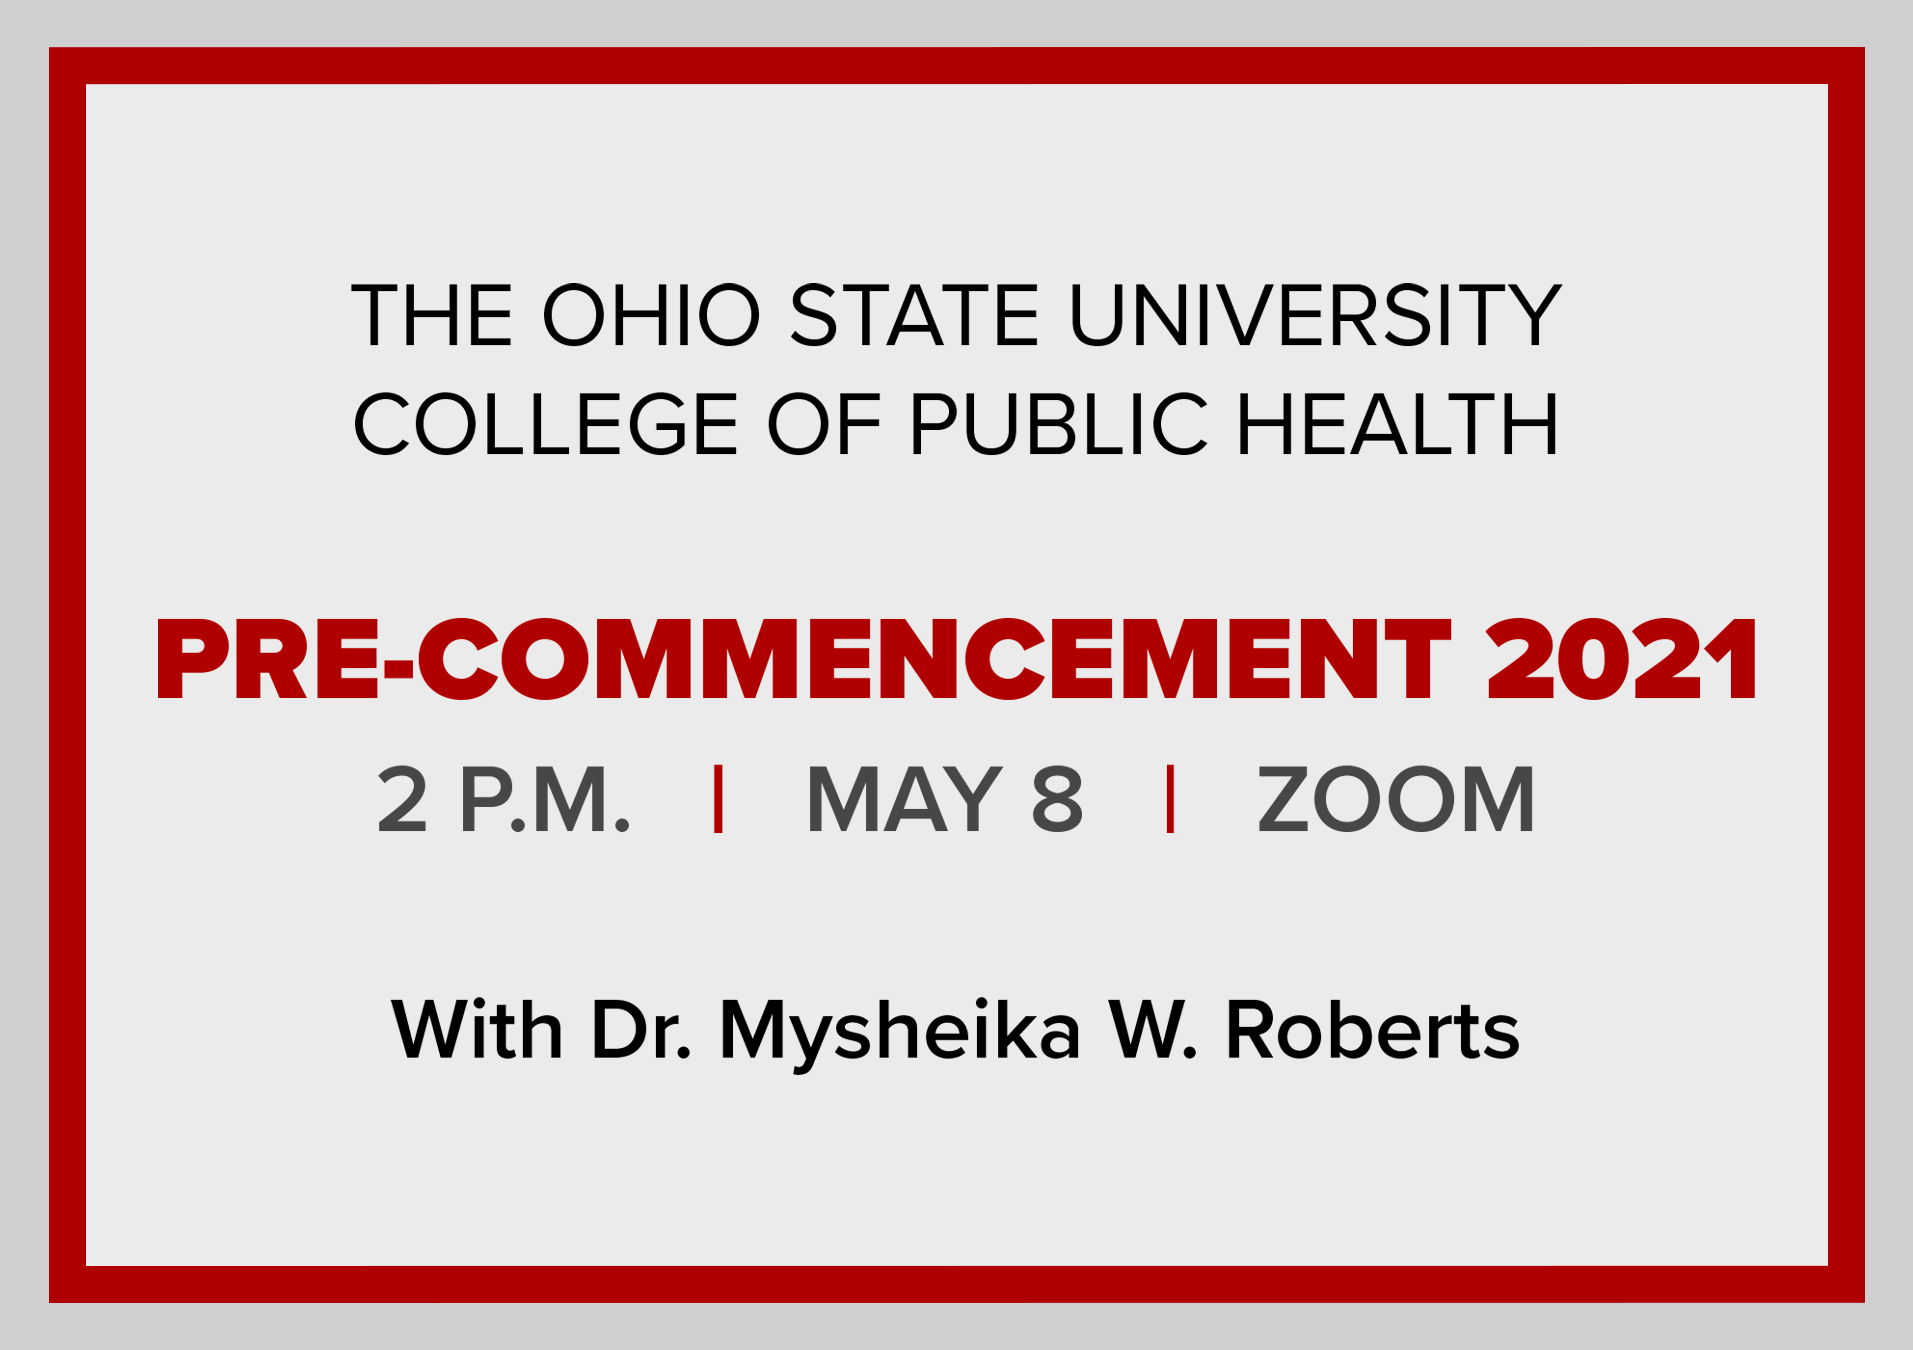 Pre-Commencement graphic with event details